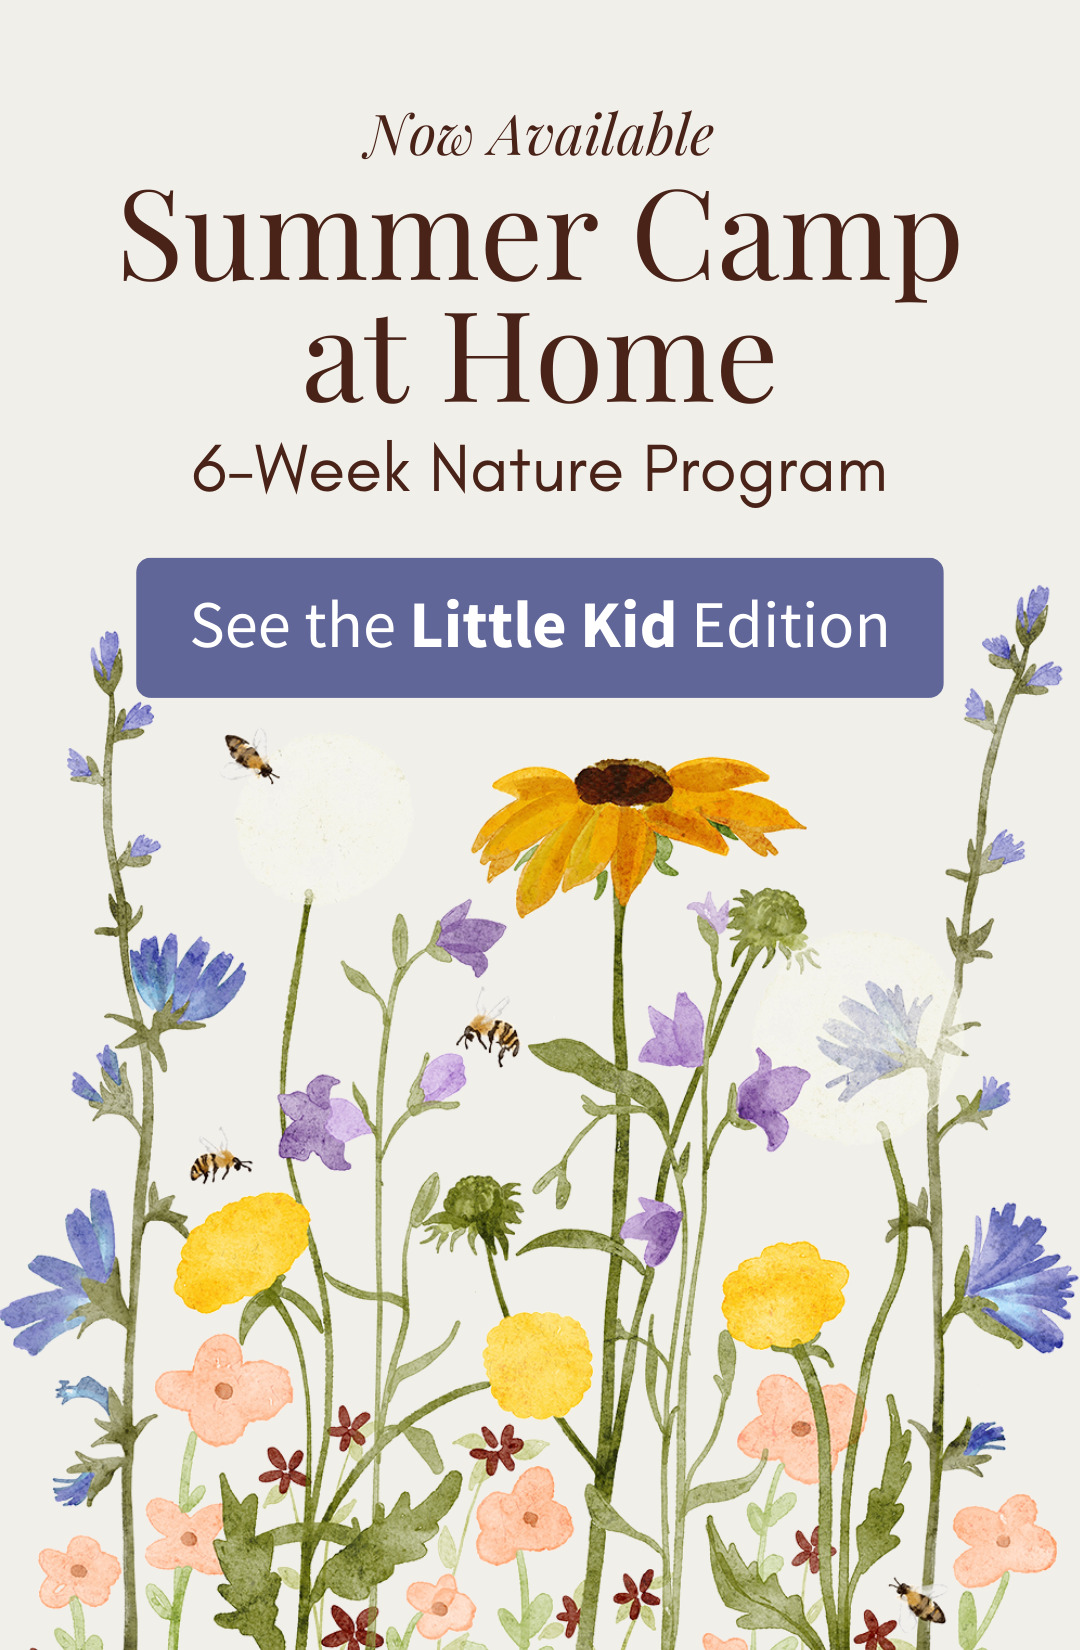 Now Available: Summer Camp at Home, 6-Week Nature Program. See the Little Kid Edition